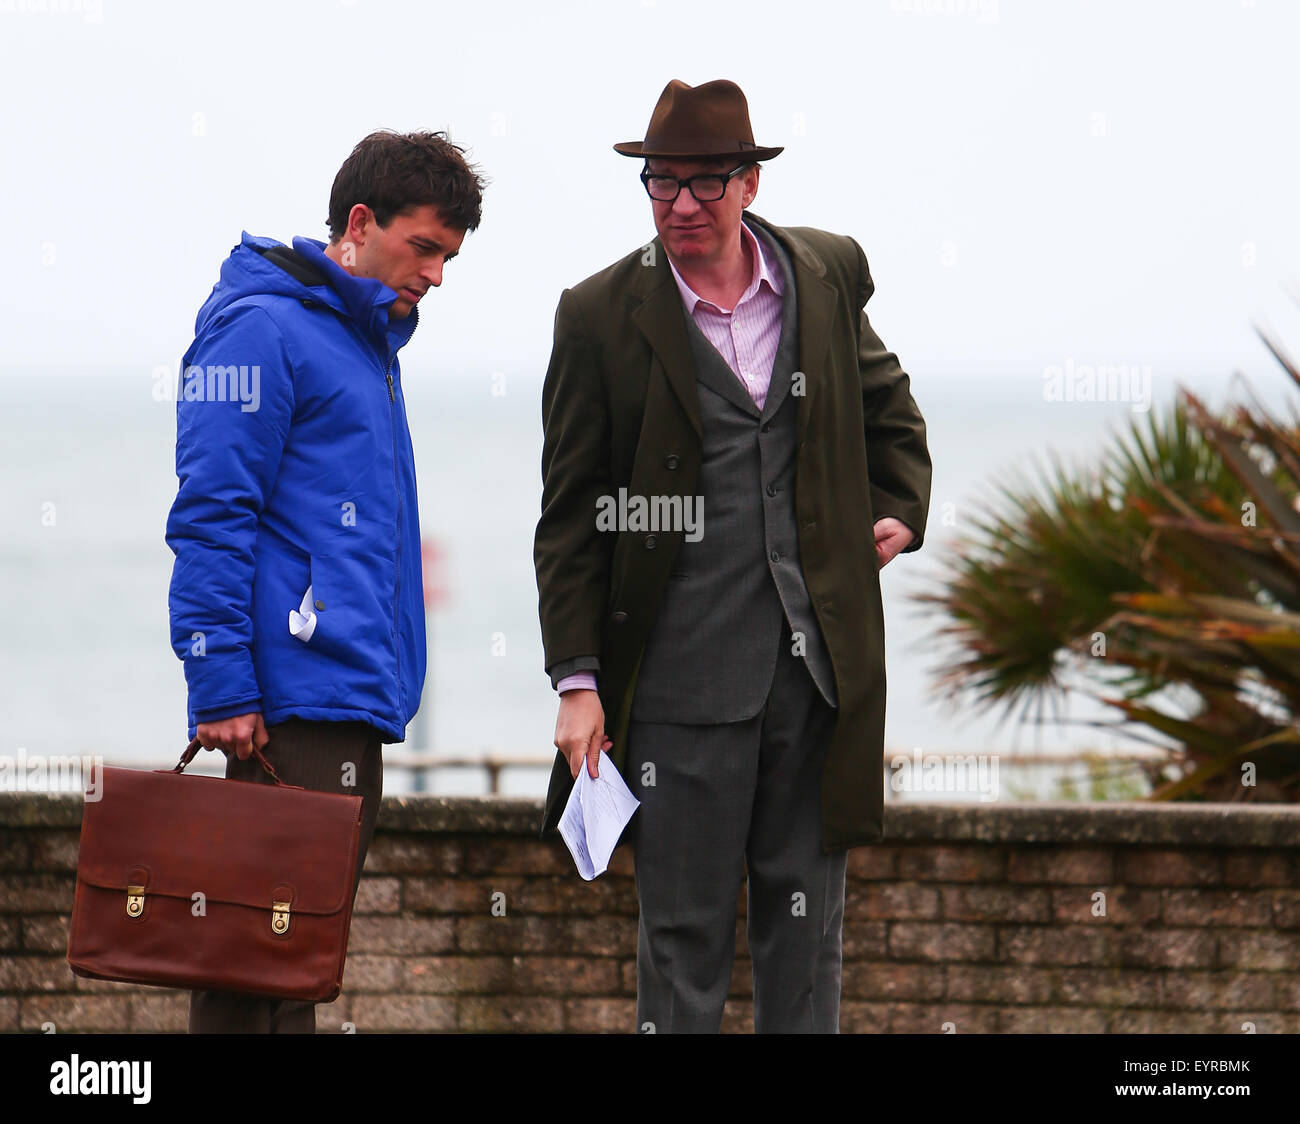 David Thewlis and Jonathan Bailey film a scene for the as yet untitled Donald Crowhurst biopic  Featuring: David Thewlis, Jonathan Bailey Where: Devon, United Kingdom When: 02 Jun 2015 C Stock Photo